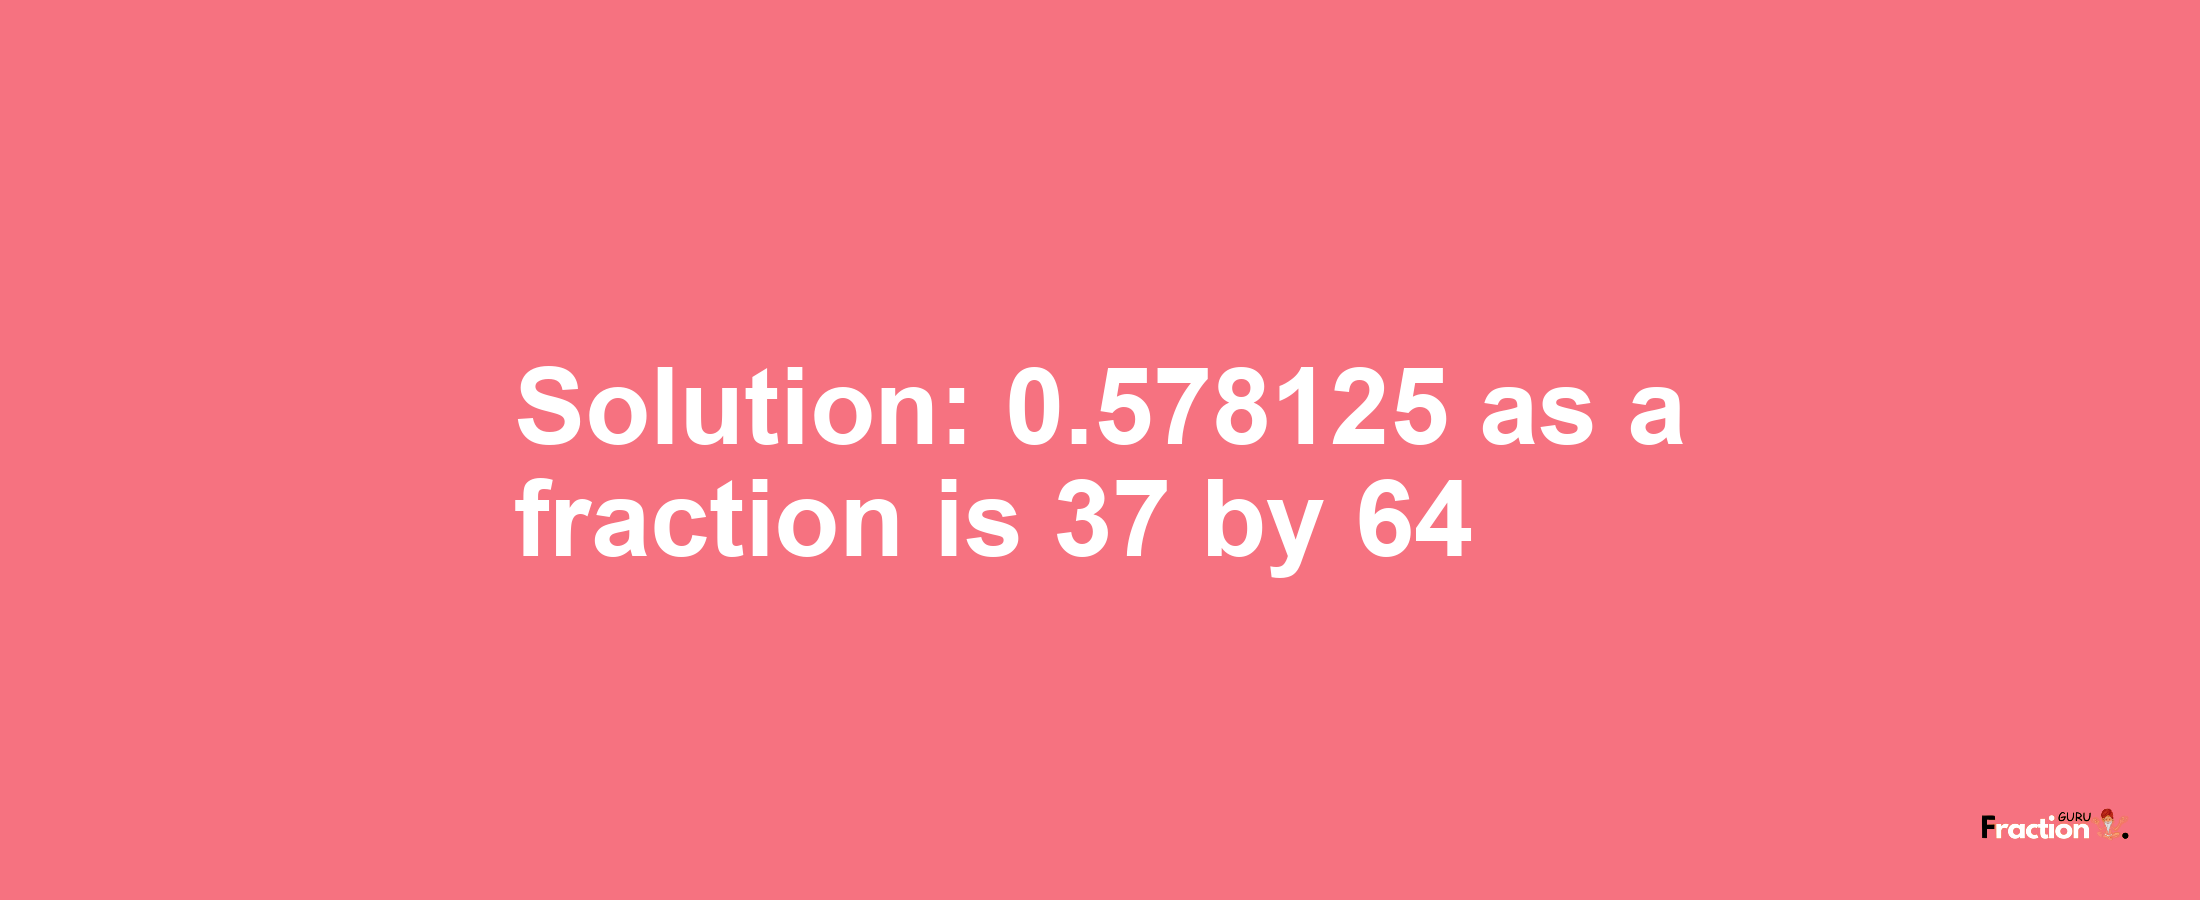 Solution:0.578125 as a fraction is 37/64